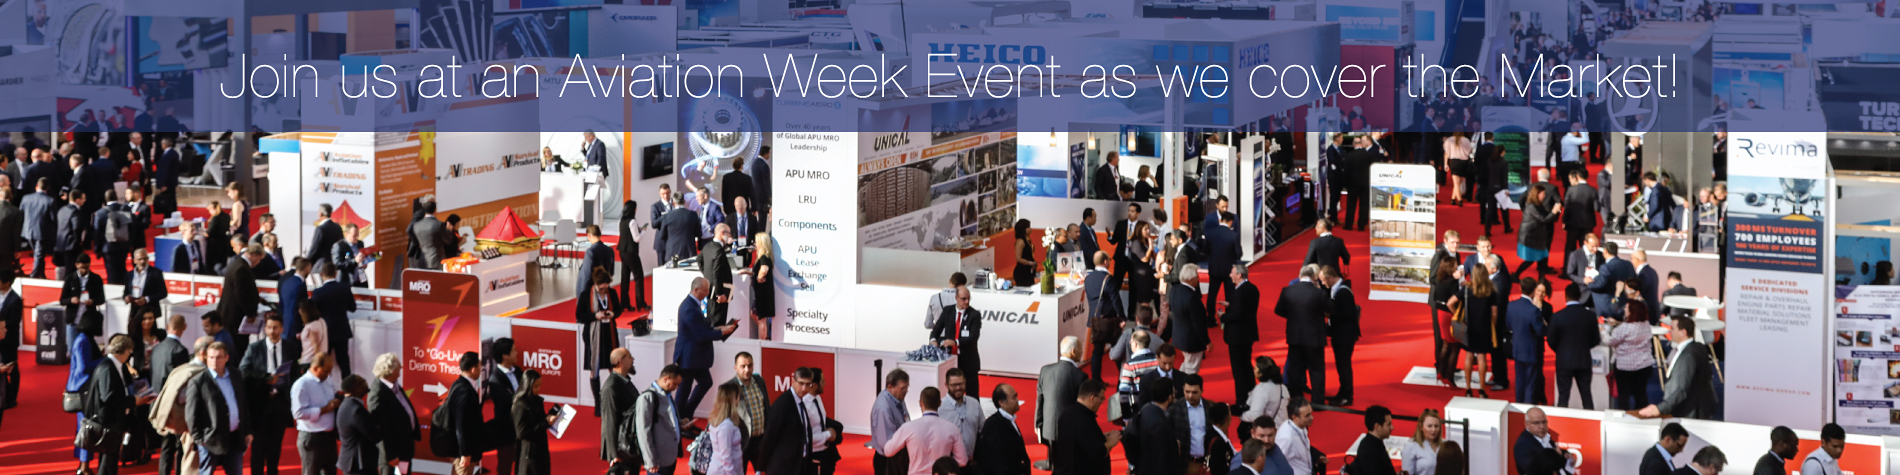 Aviation Week Events - welcome to aviation week network events